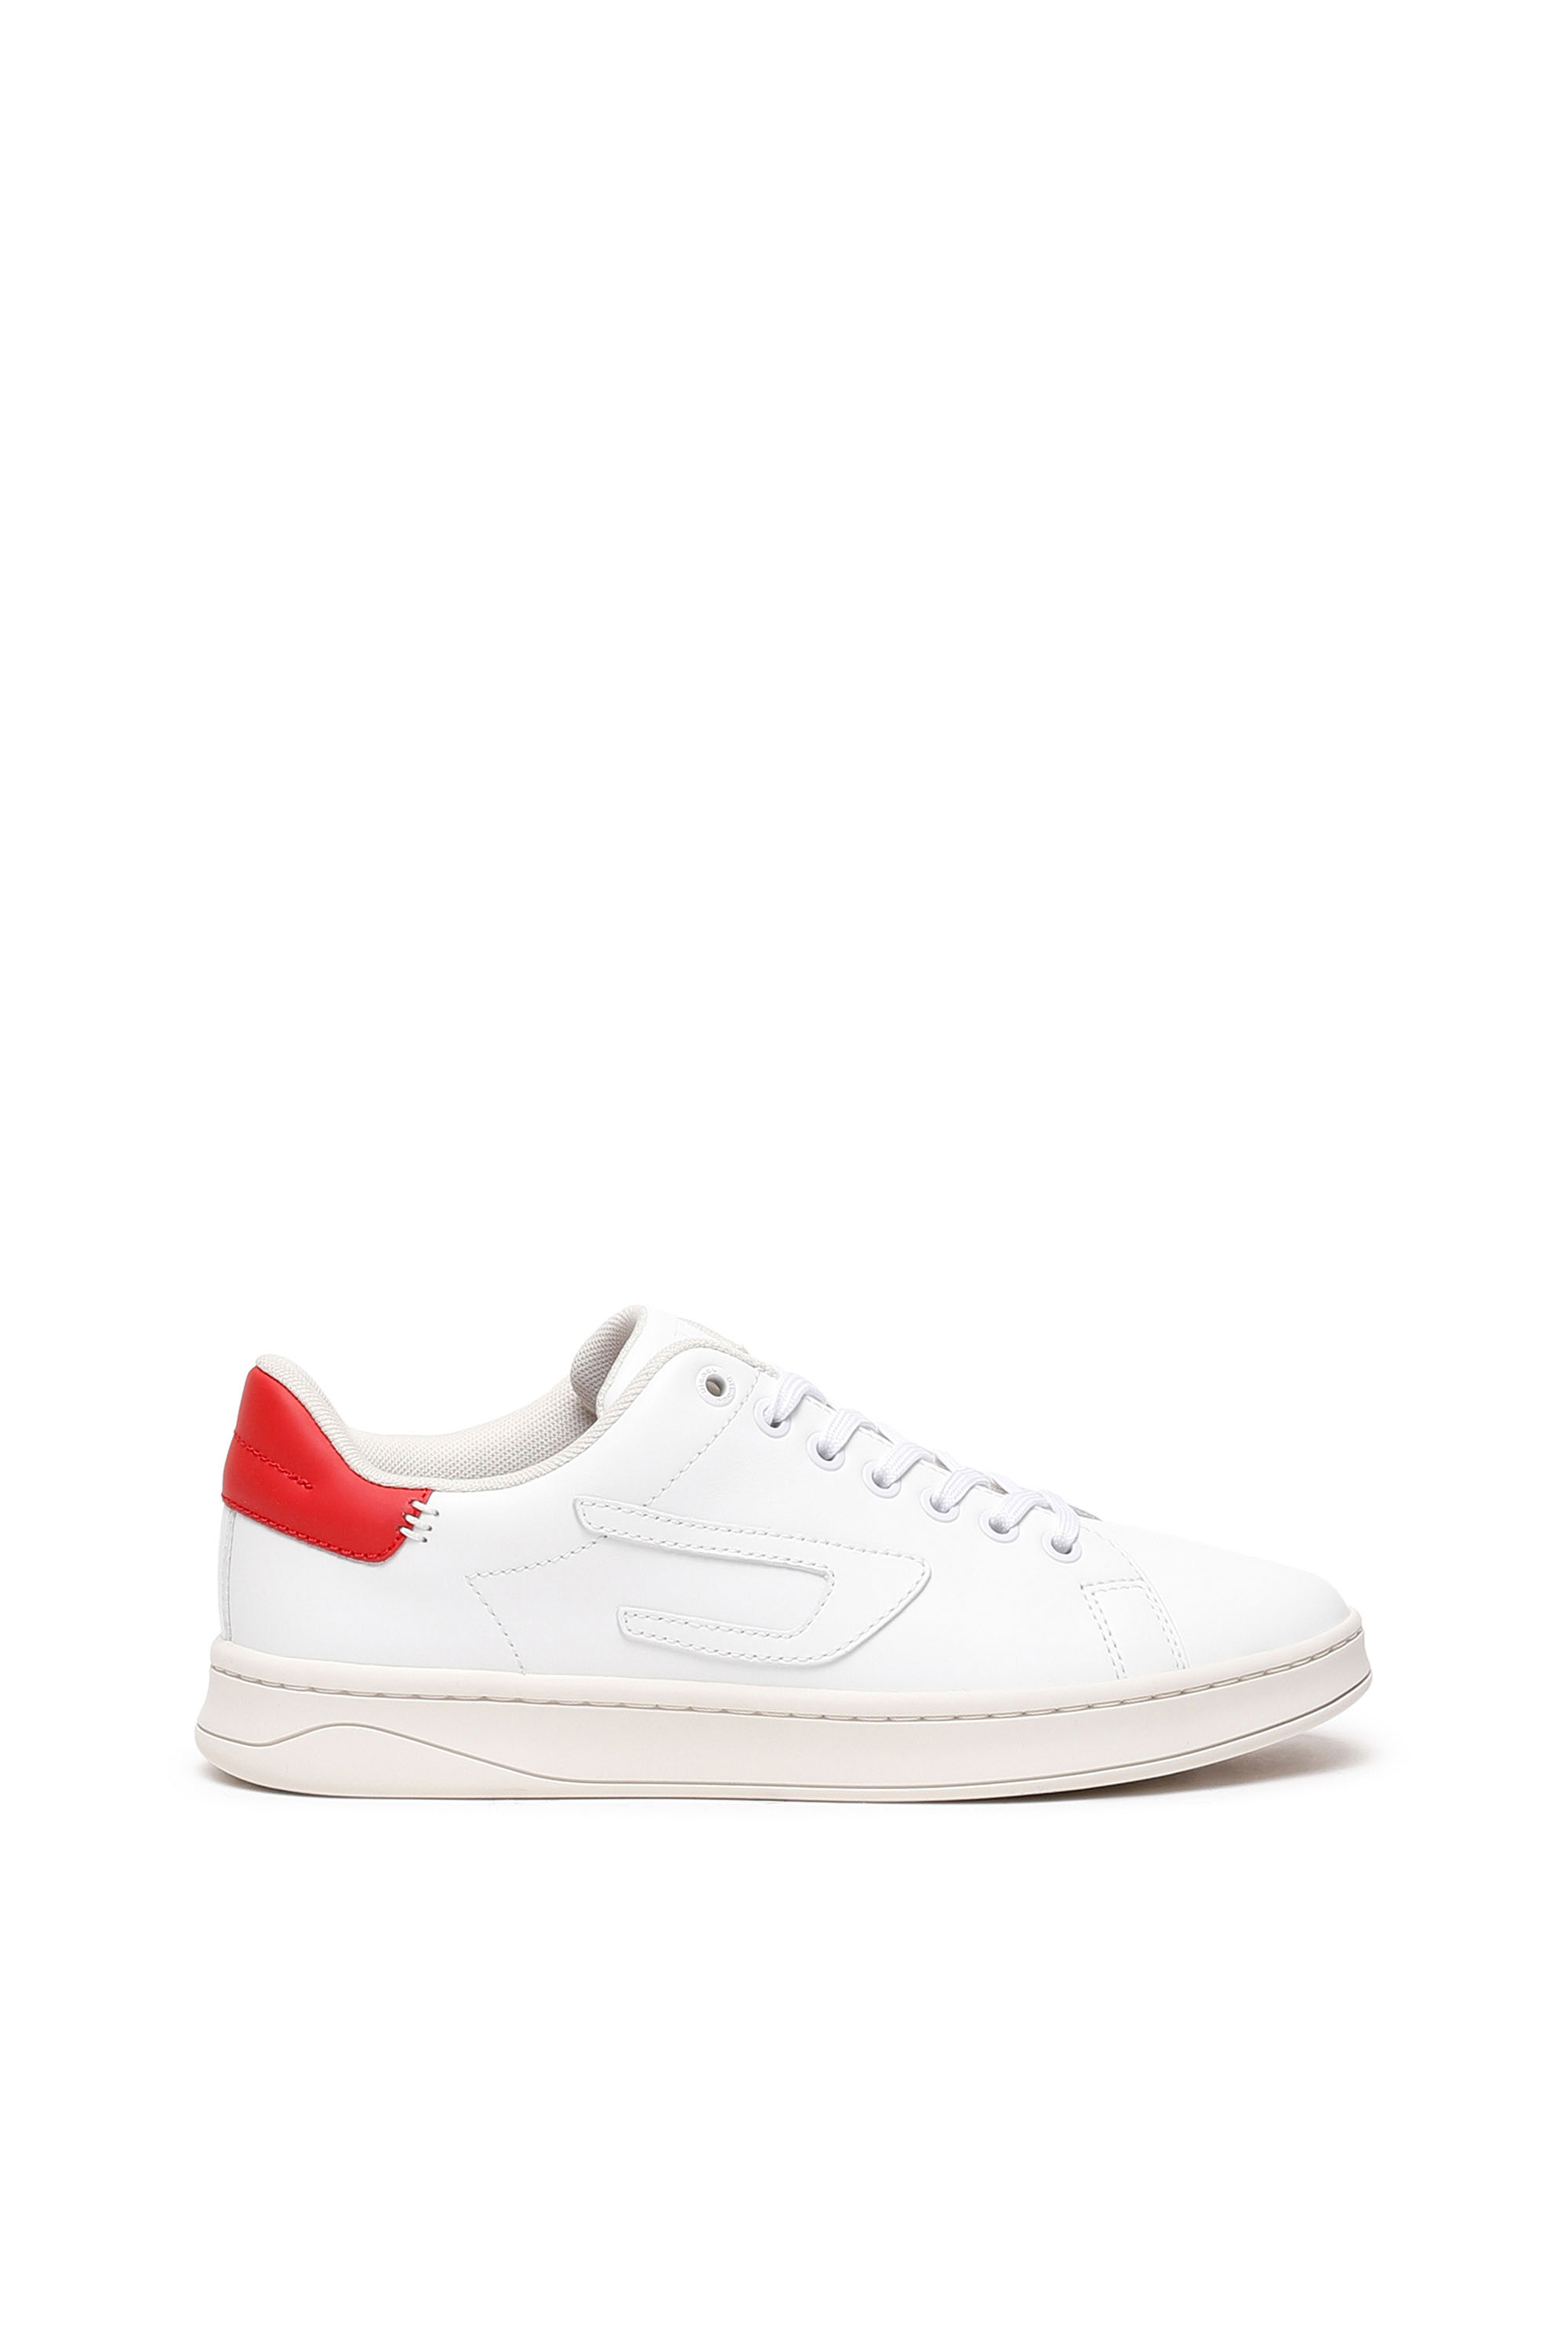 Diesel - S-ATHENE LOW W, White/Red - Image 1